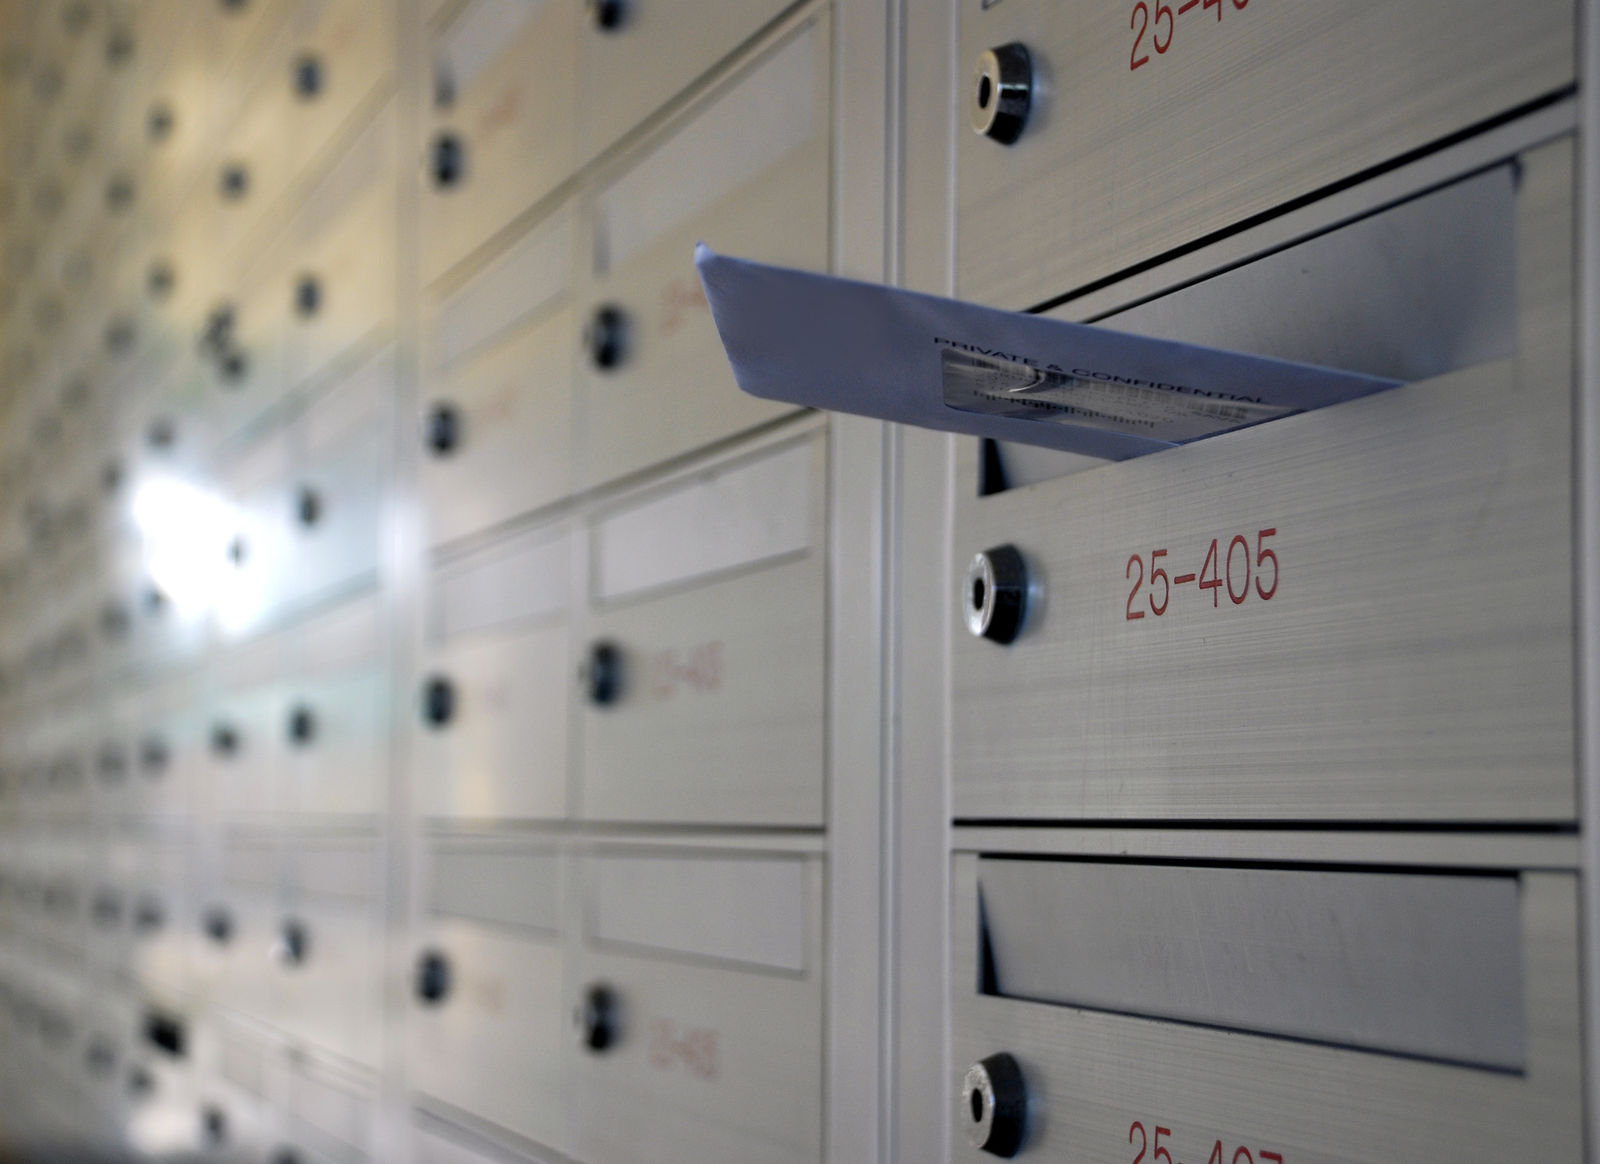 Can you use a PO Box address for car insurance?